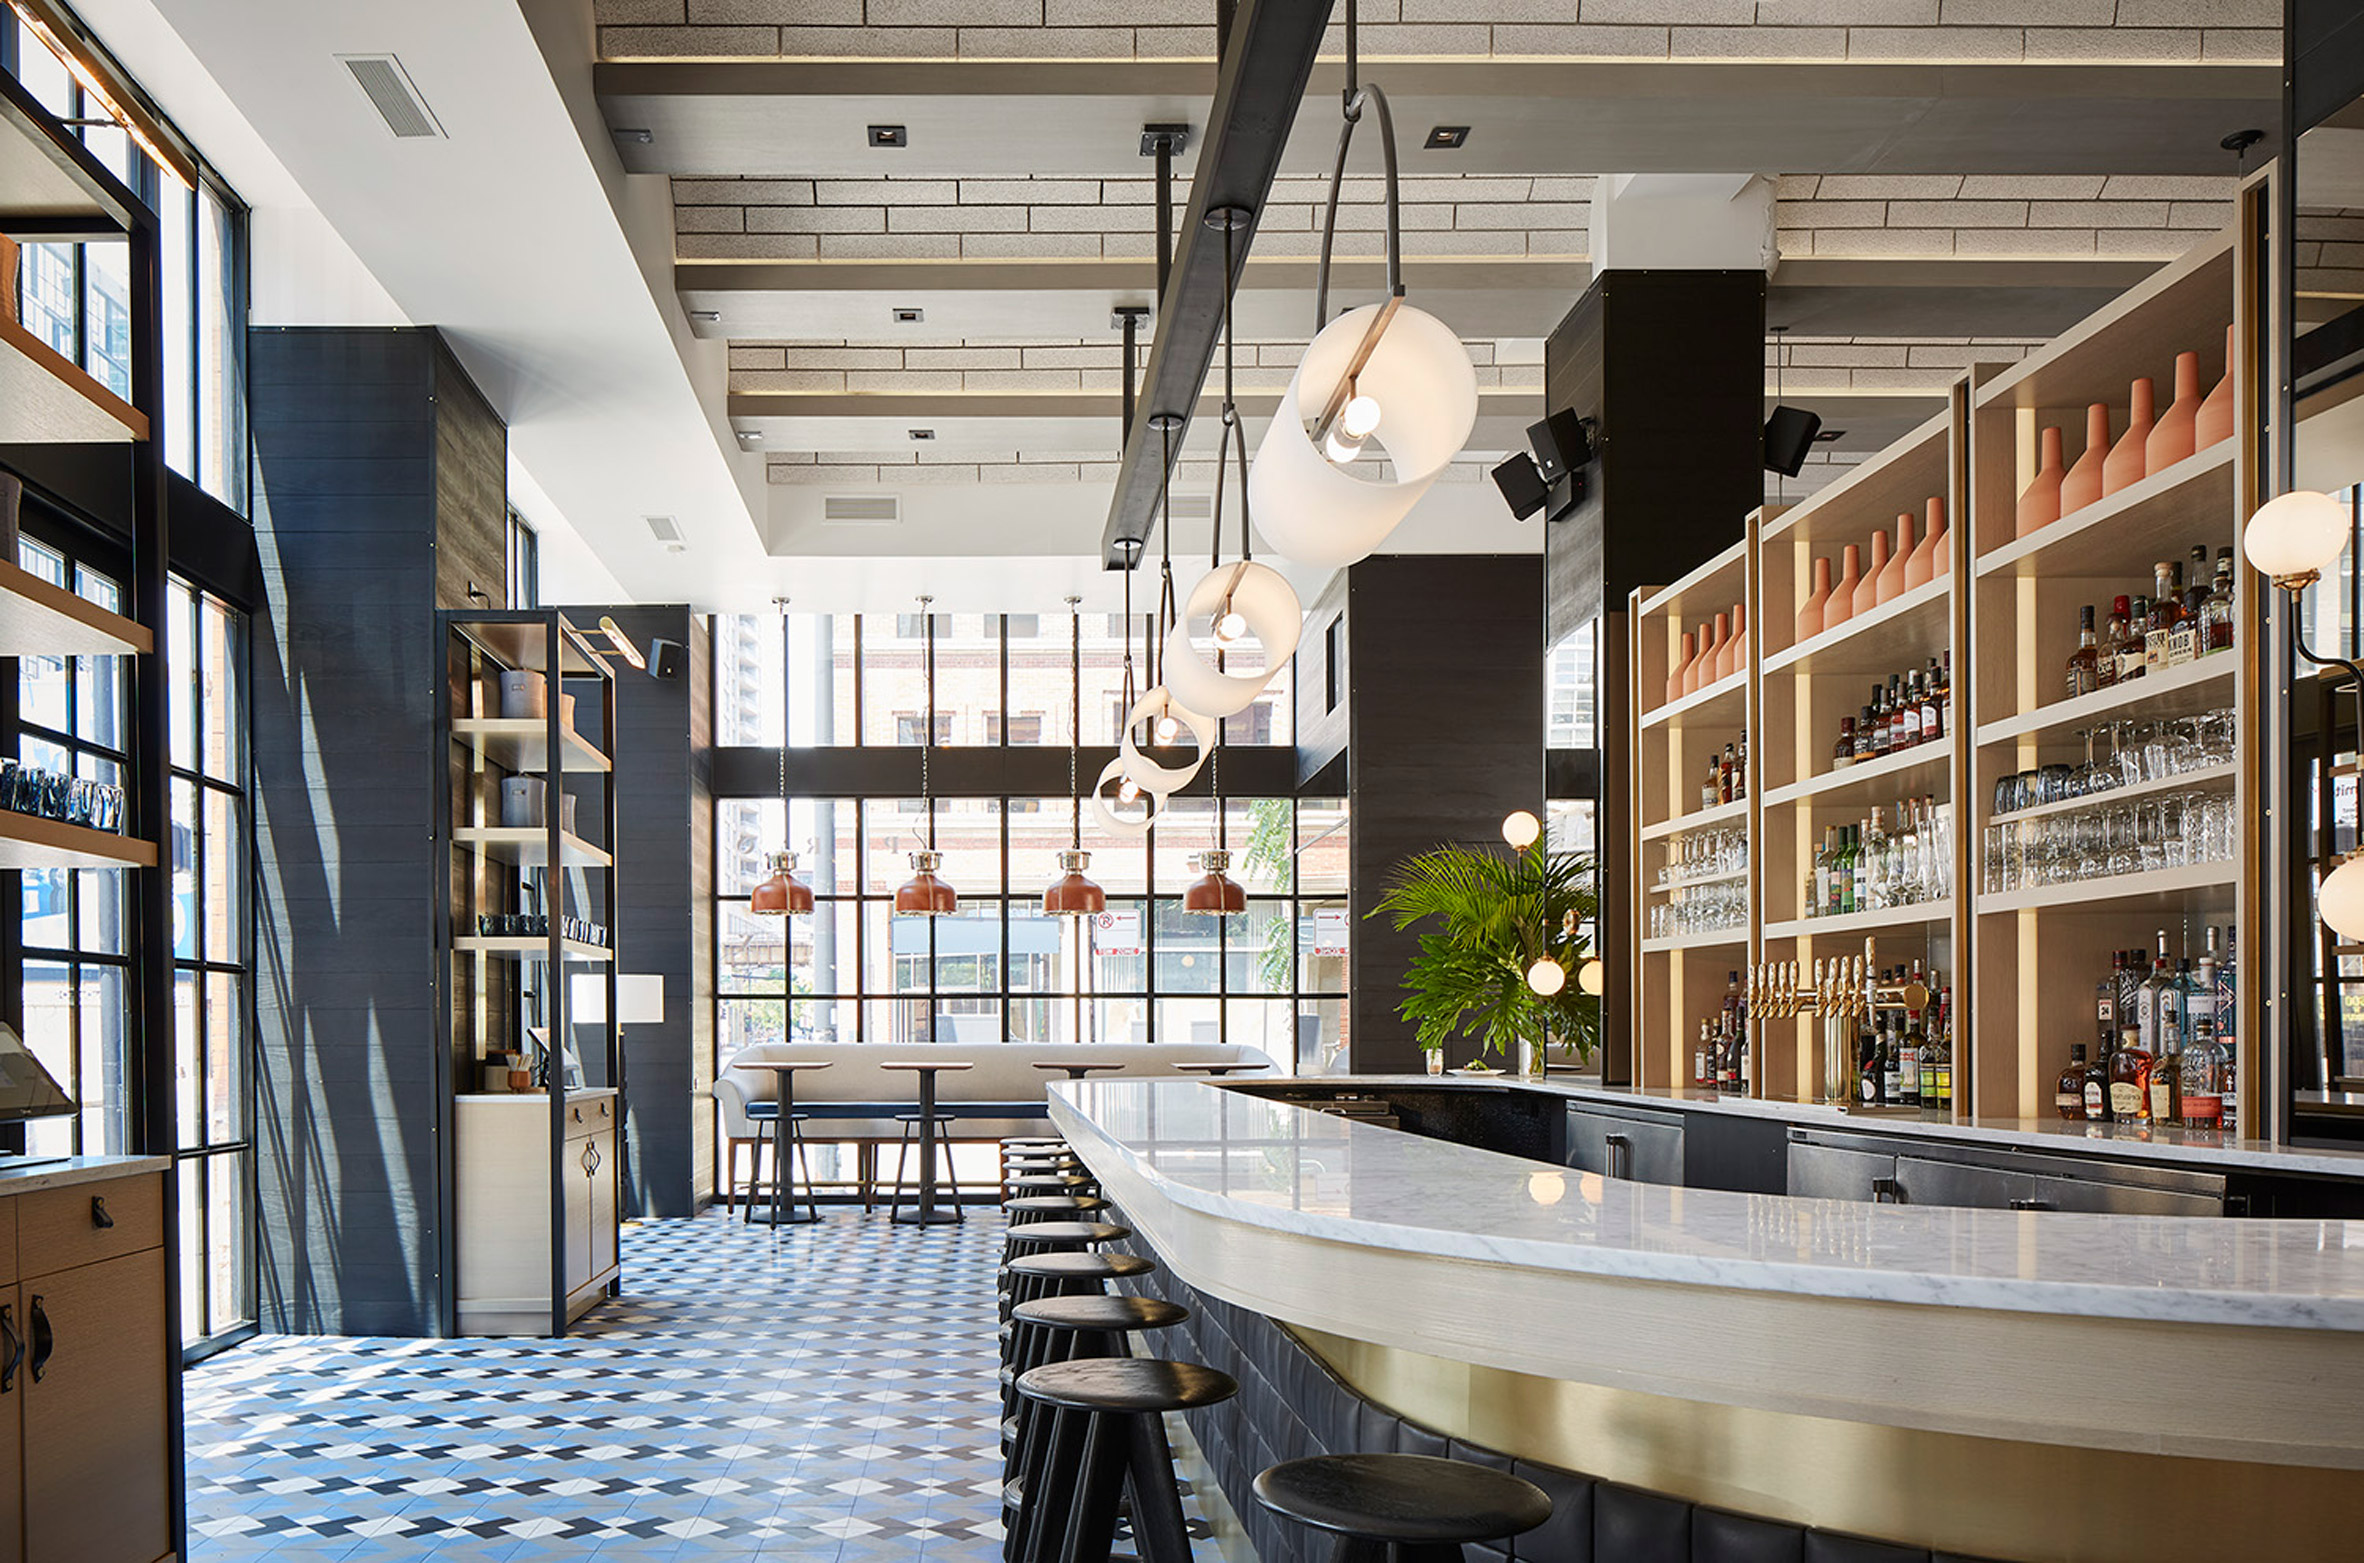 The Proxi restaurant occupies former printing house in Chicago